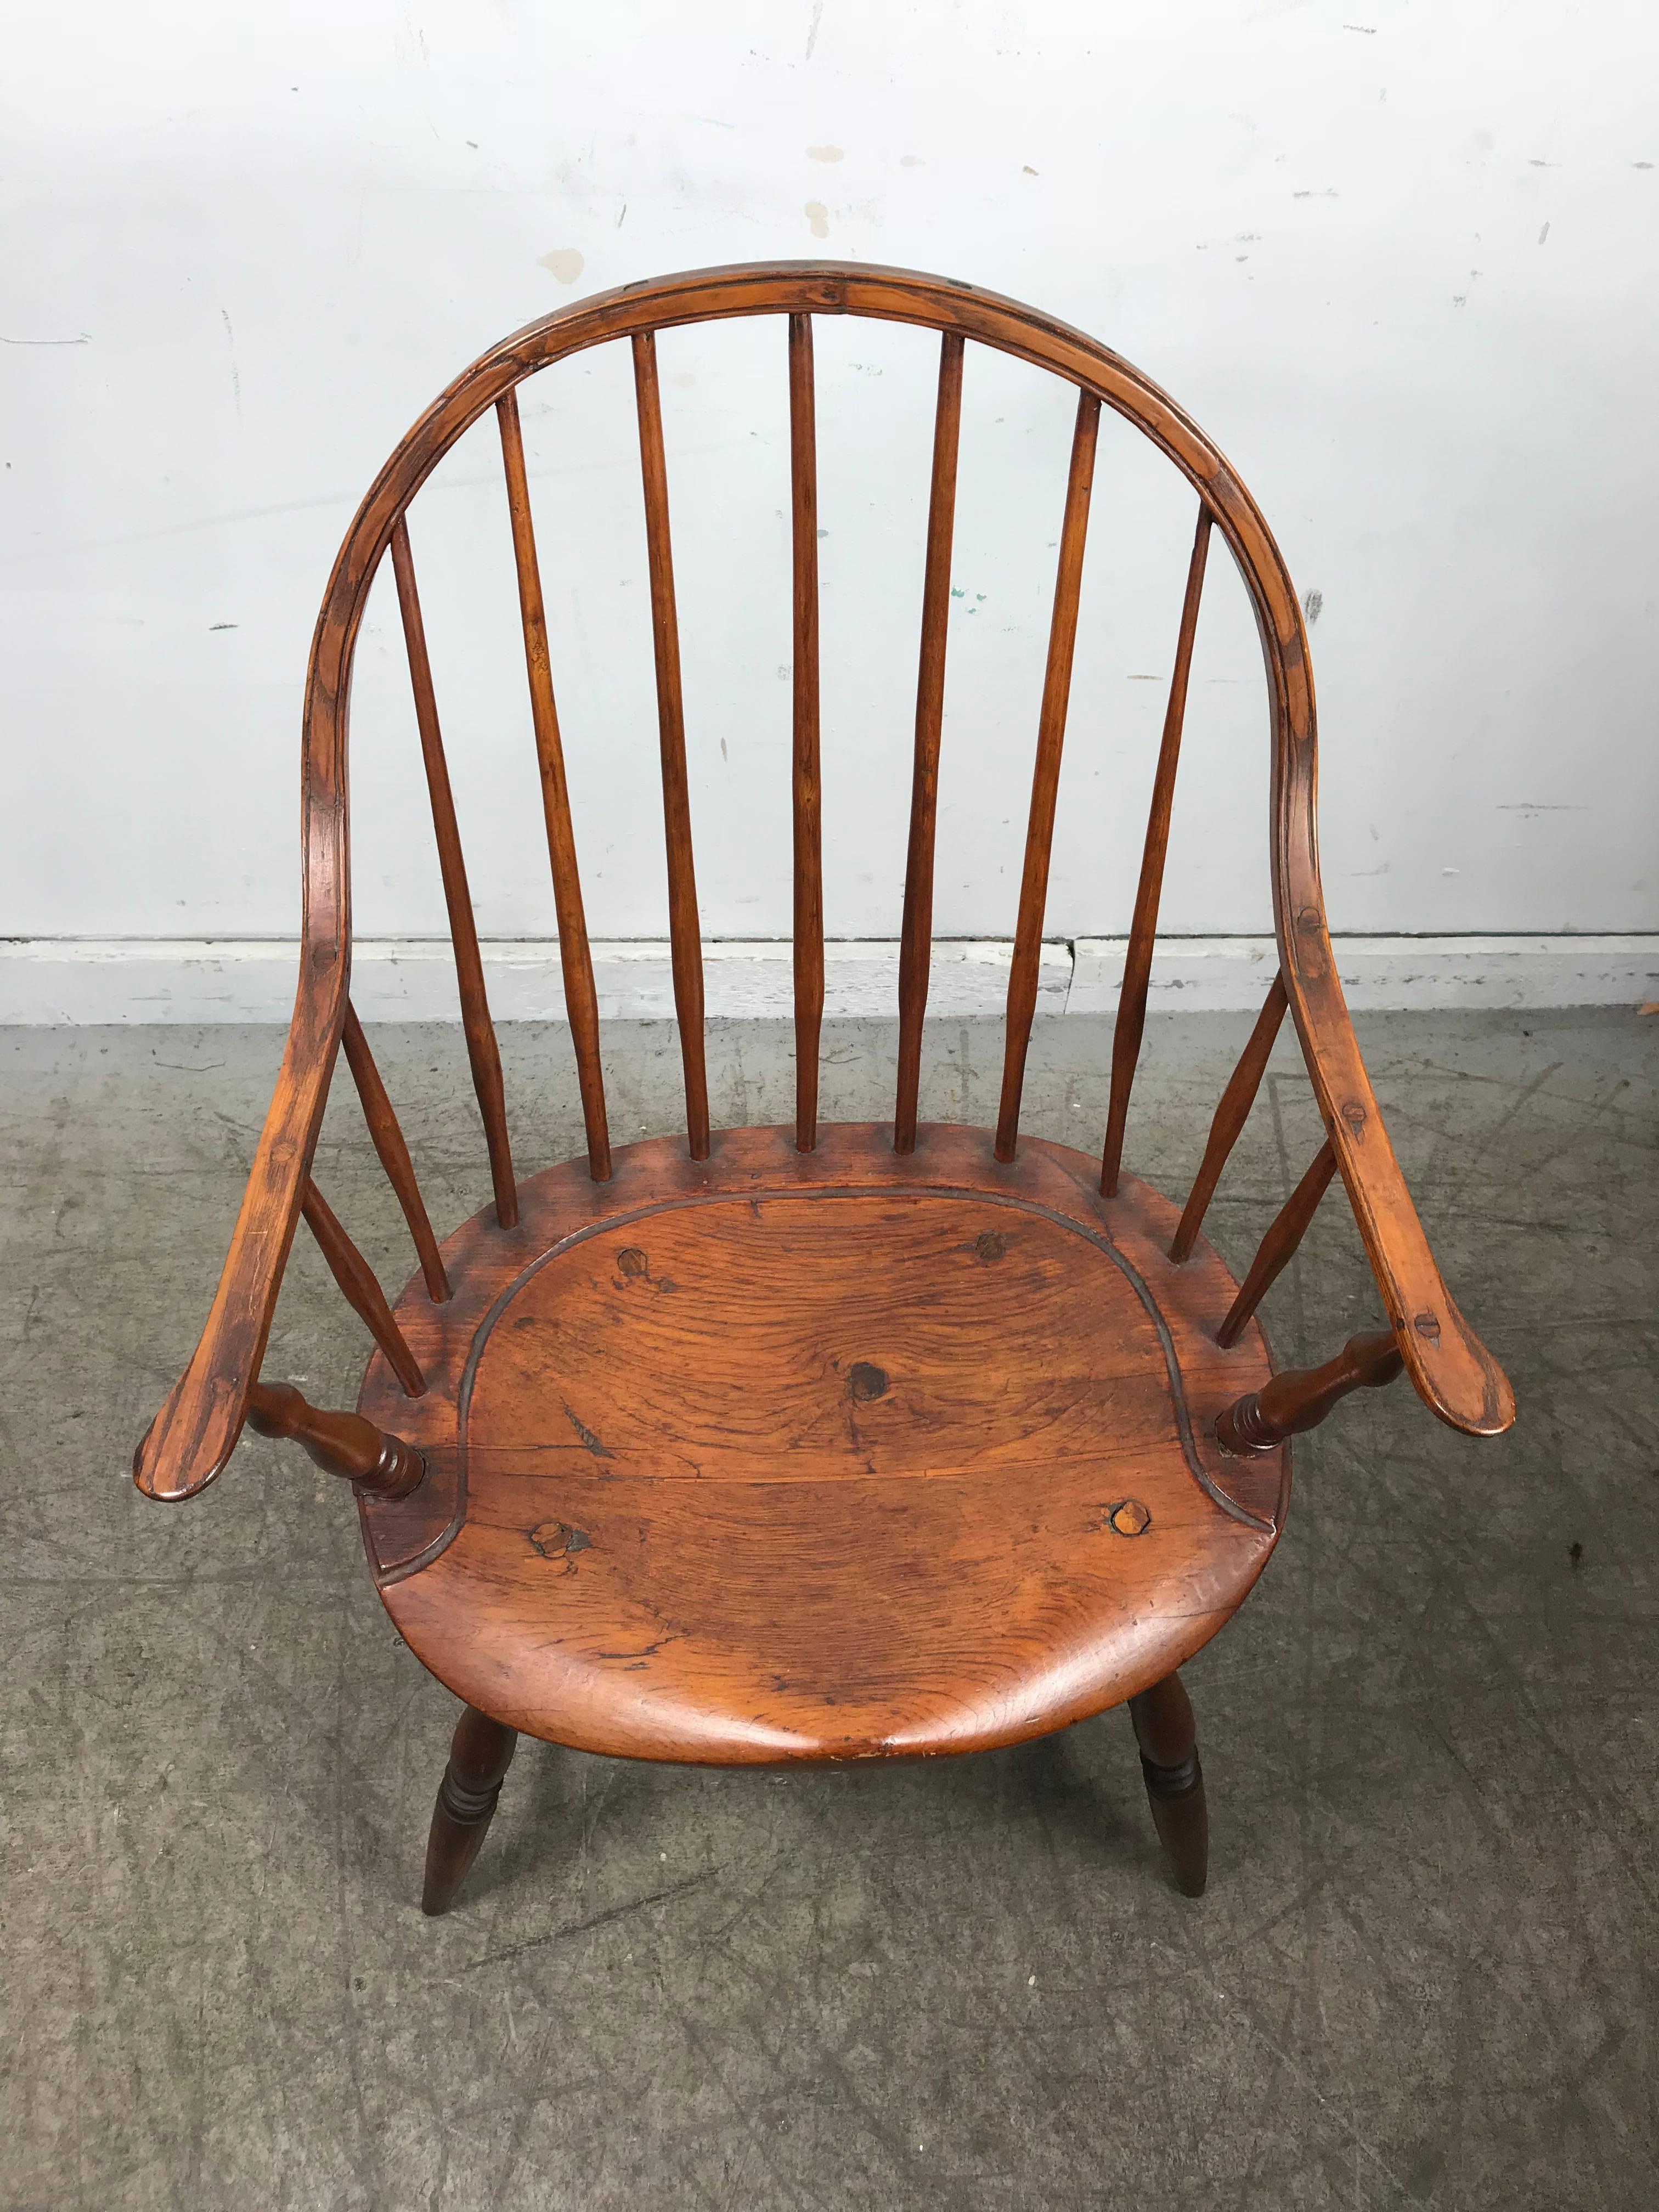 Early continuous Windsor chair with chestnut seat circa 1780 attributed to Ebenezer Lacy, great old chair for your Americana collection.